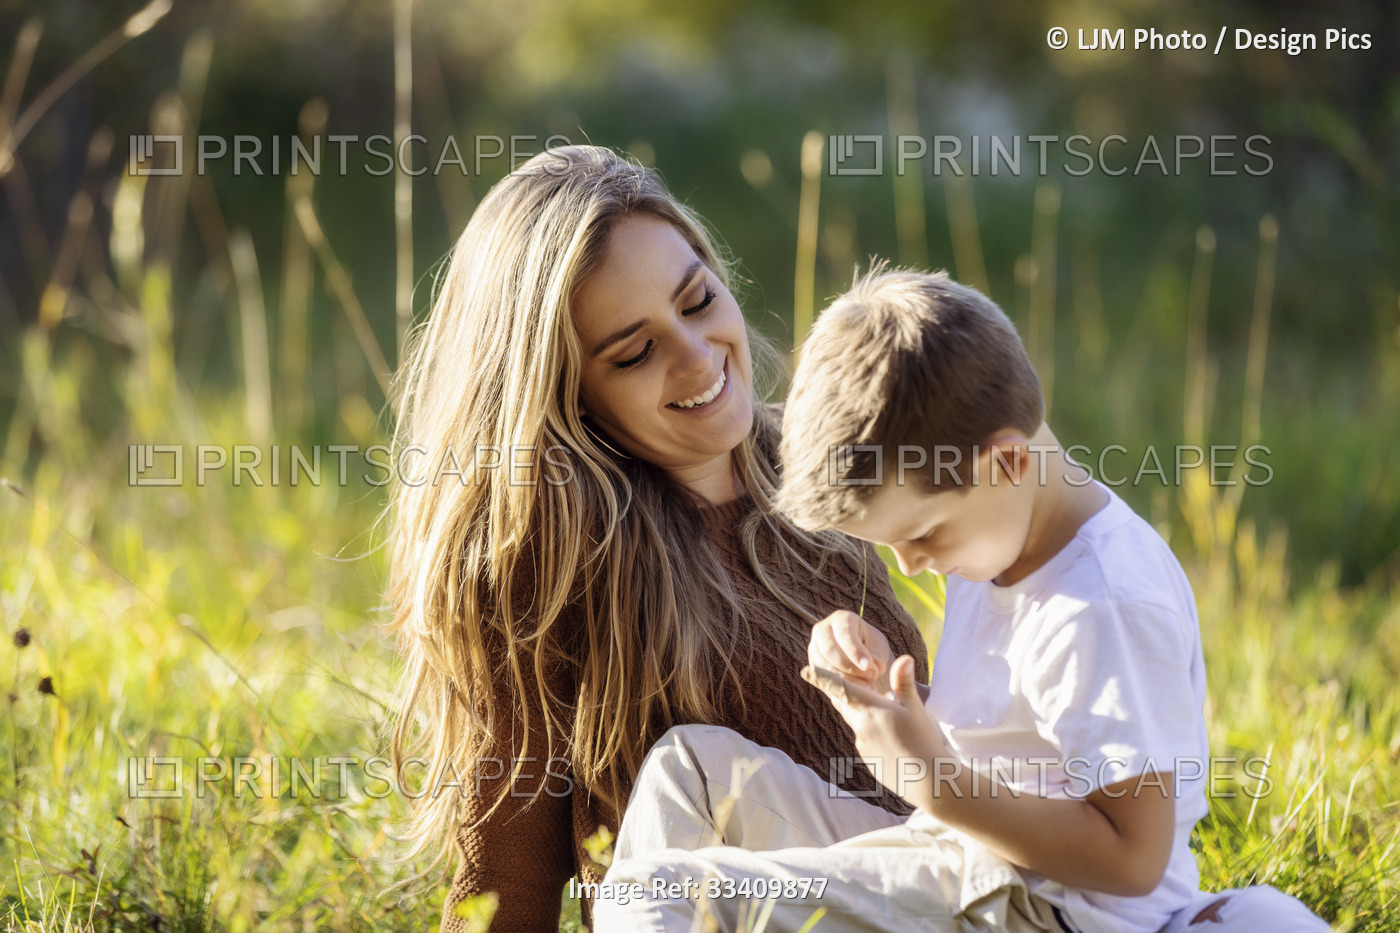 A mother spending quality time with her young son, outdoors in a city park; ...